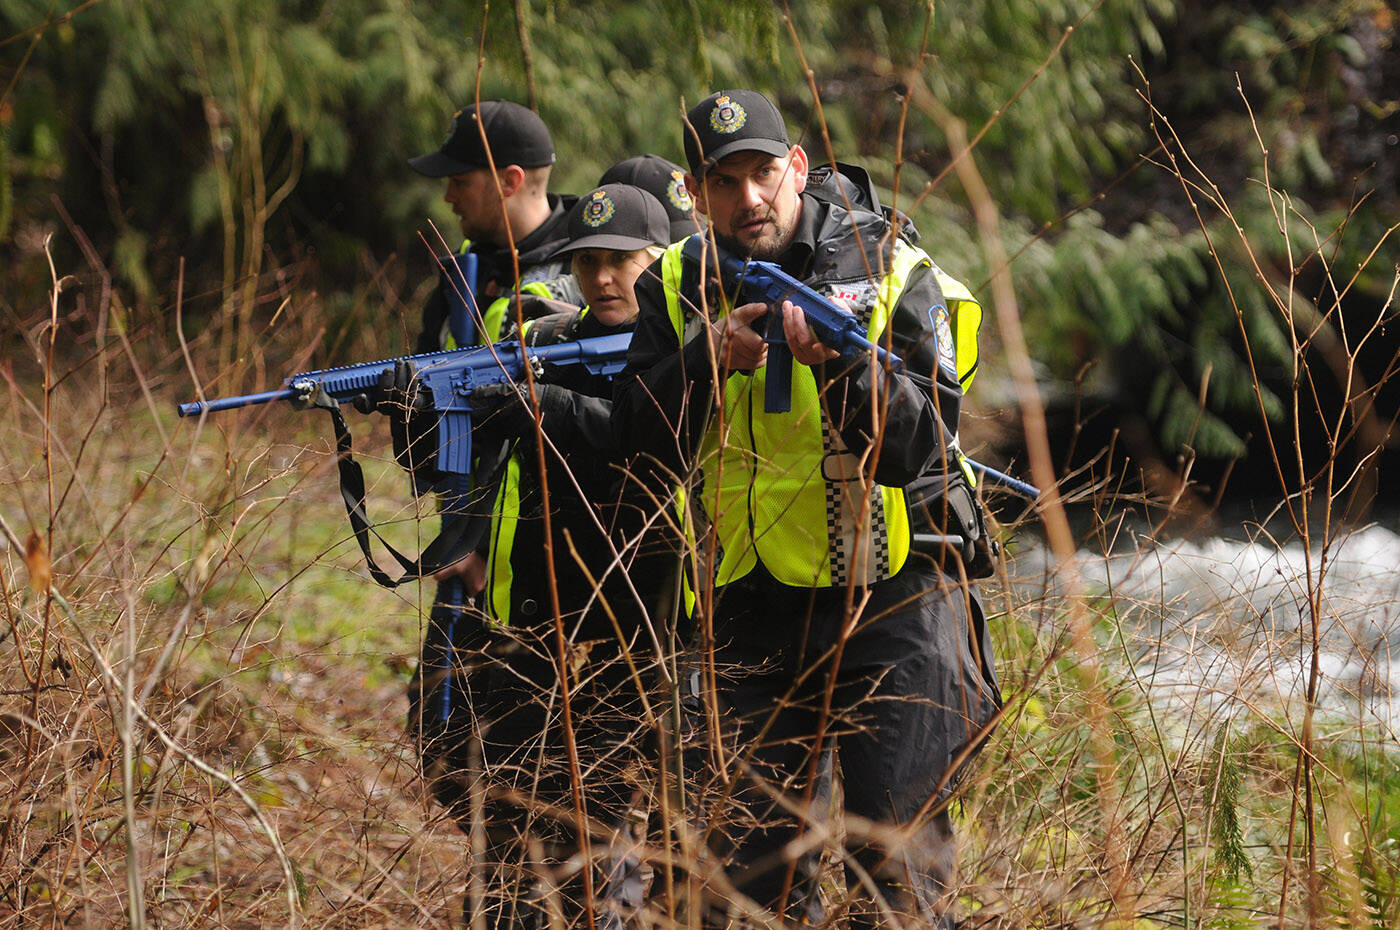 Conservation officers move in a tactical diamond formation while taking part in a wildlife attack training scenario in Chilliwack on Thursday, March 3, 2022. (Jenna Hauck/ Chilliwack Progress)